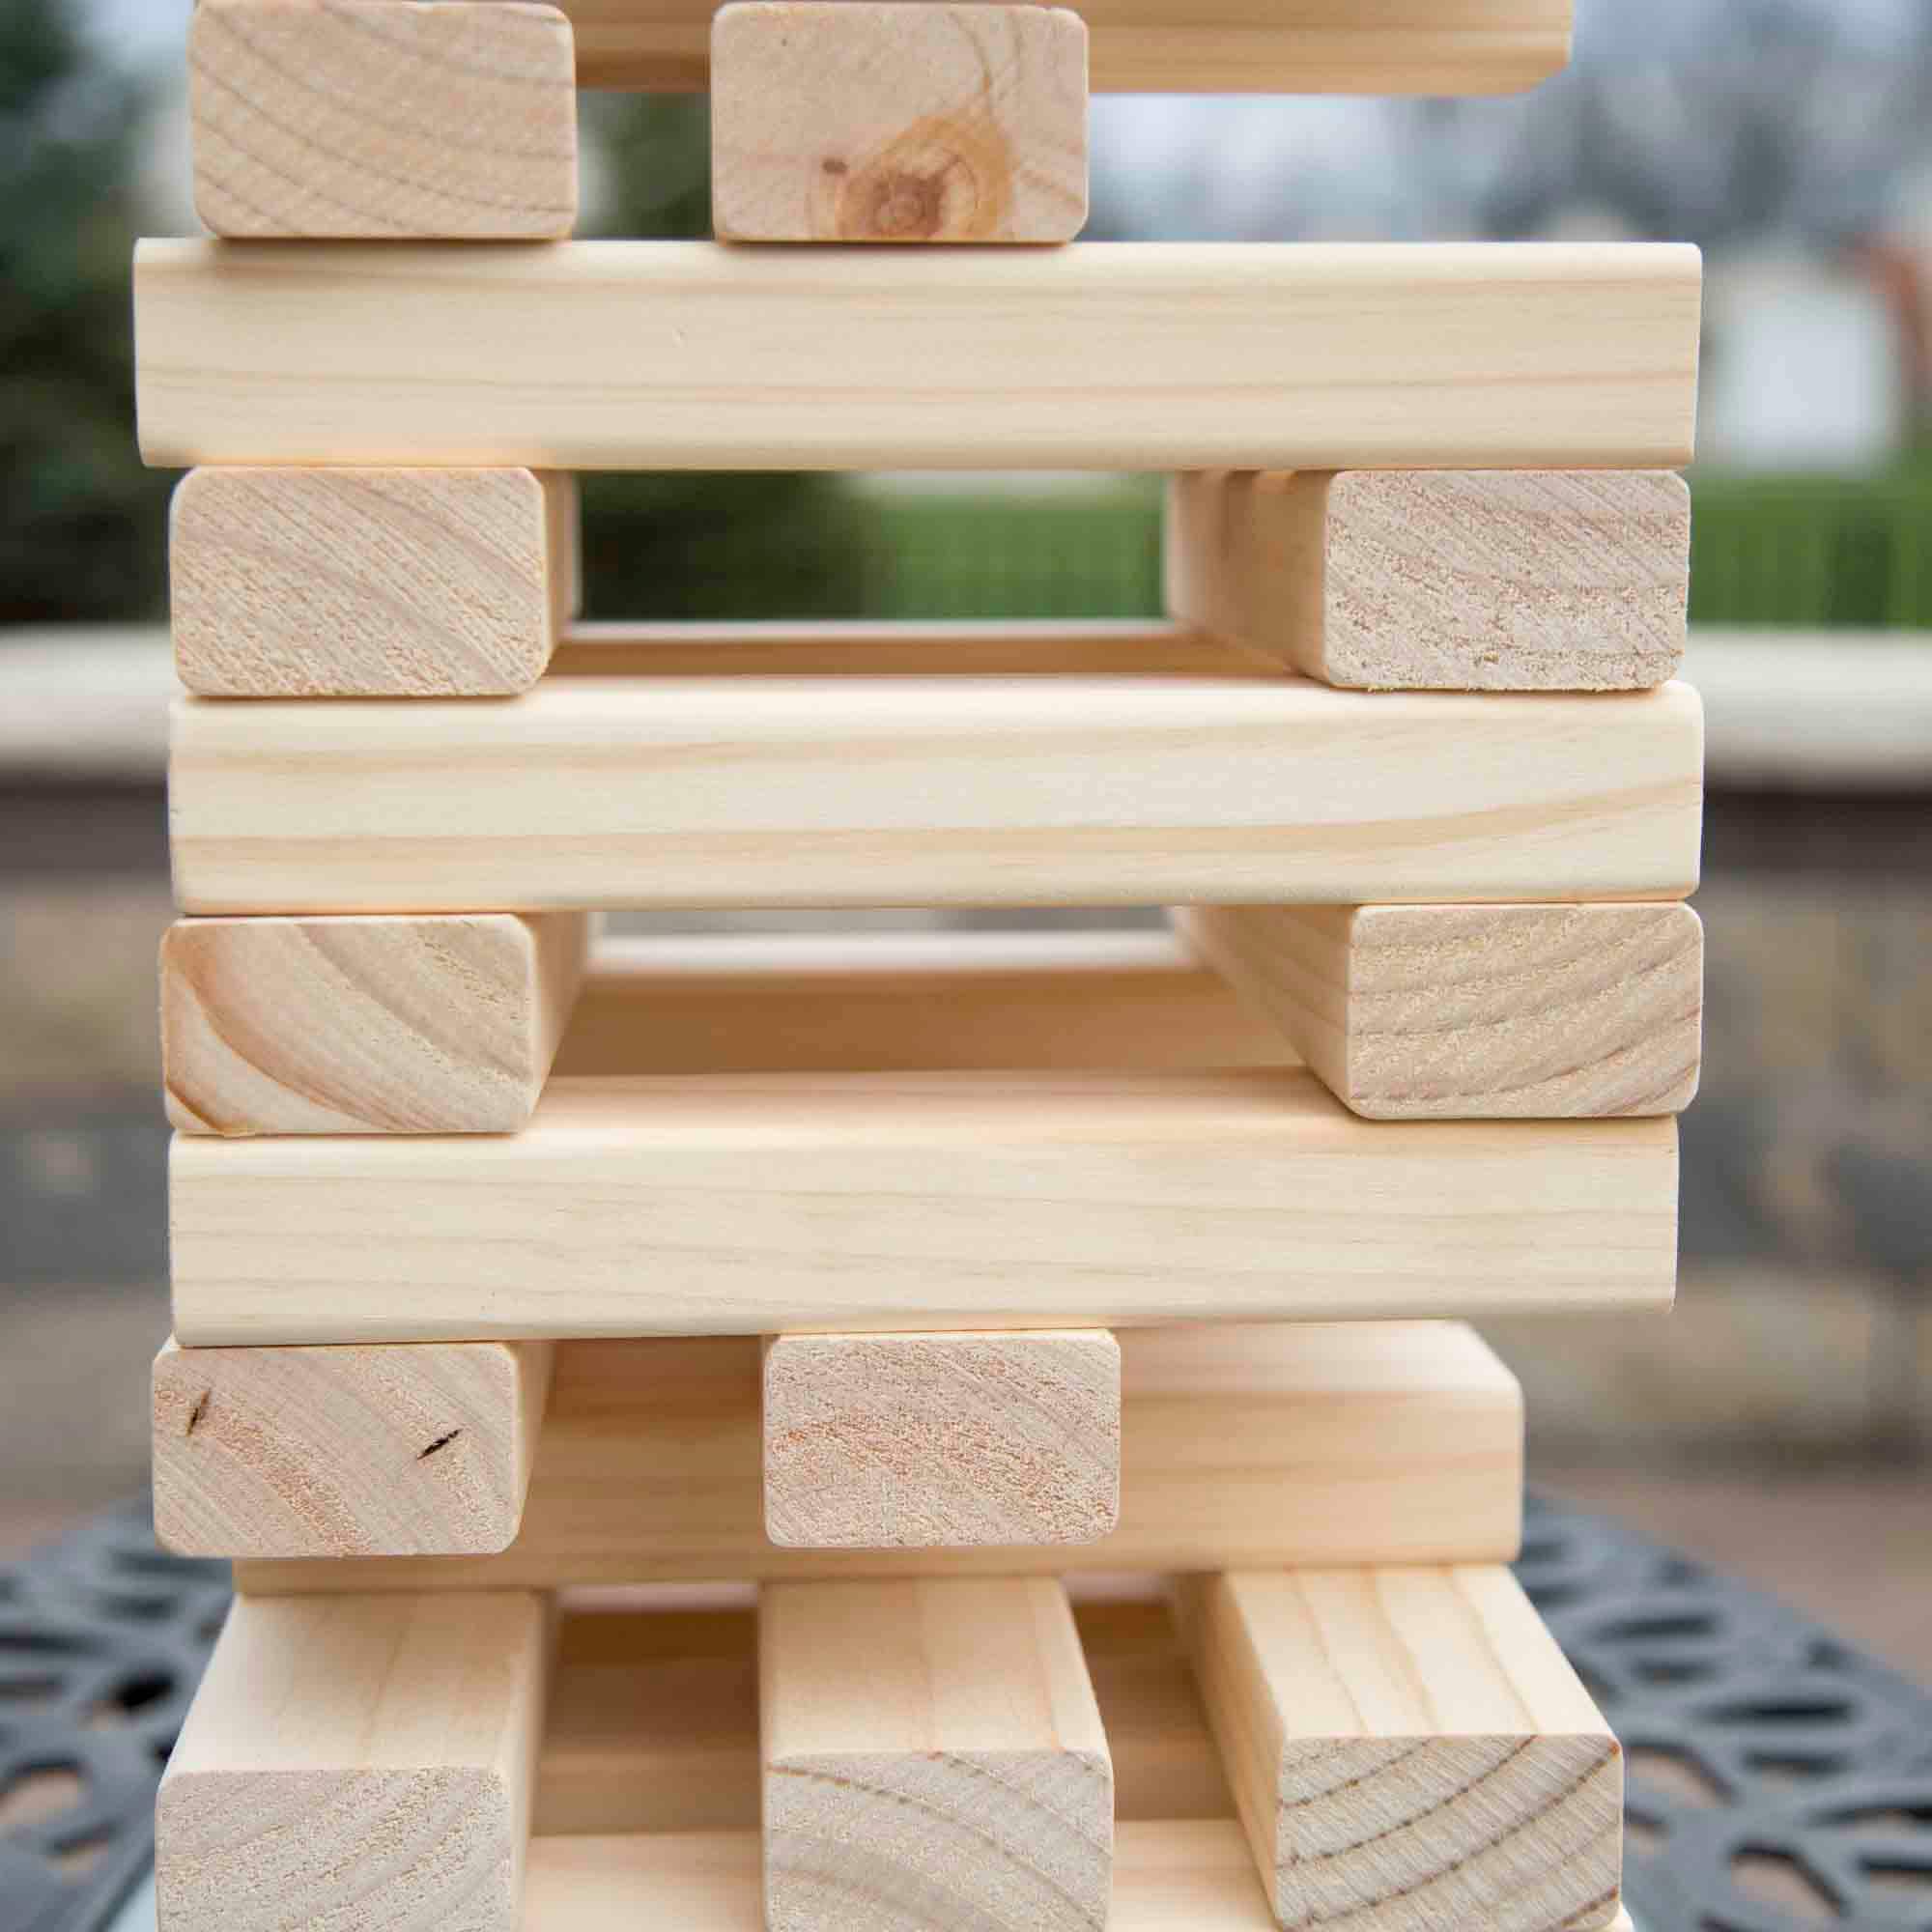 Toy Time Outdoor Giant Wooden Blocks Tower Stacking Game Set